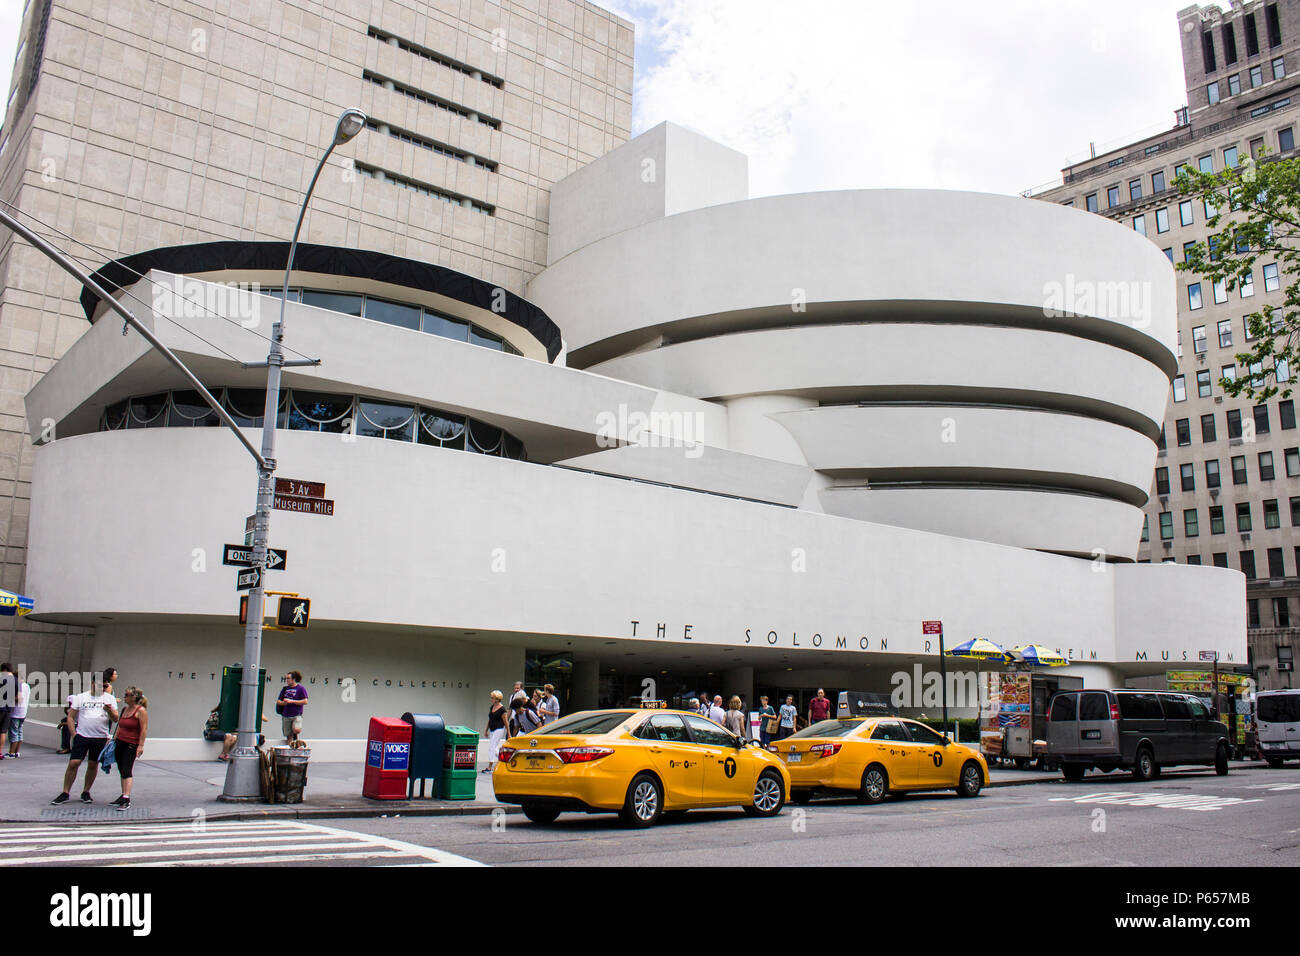 New York City. The Solomon R. Guggenheim Museum, an art museum located at Fifth Avenue in the Upper East Side neighborhood of Manhattan. Built in 1959 Stock Photo